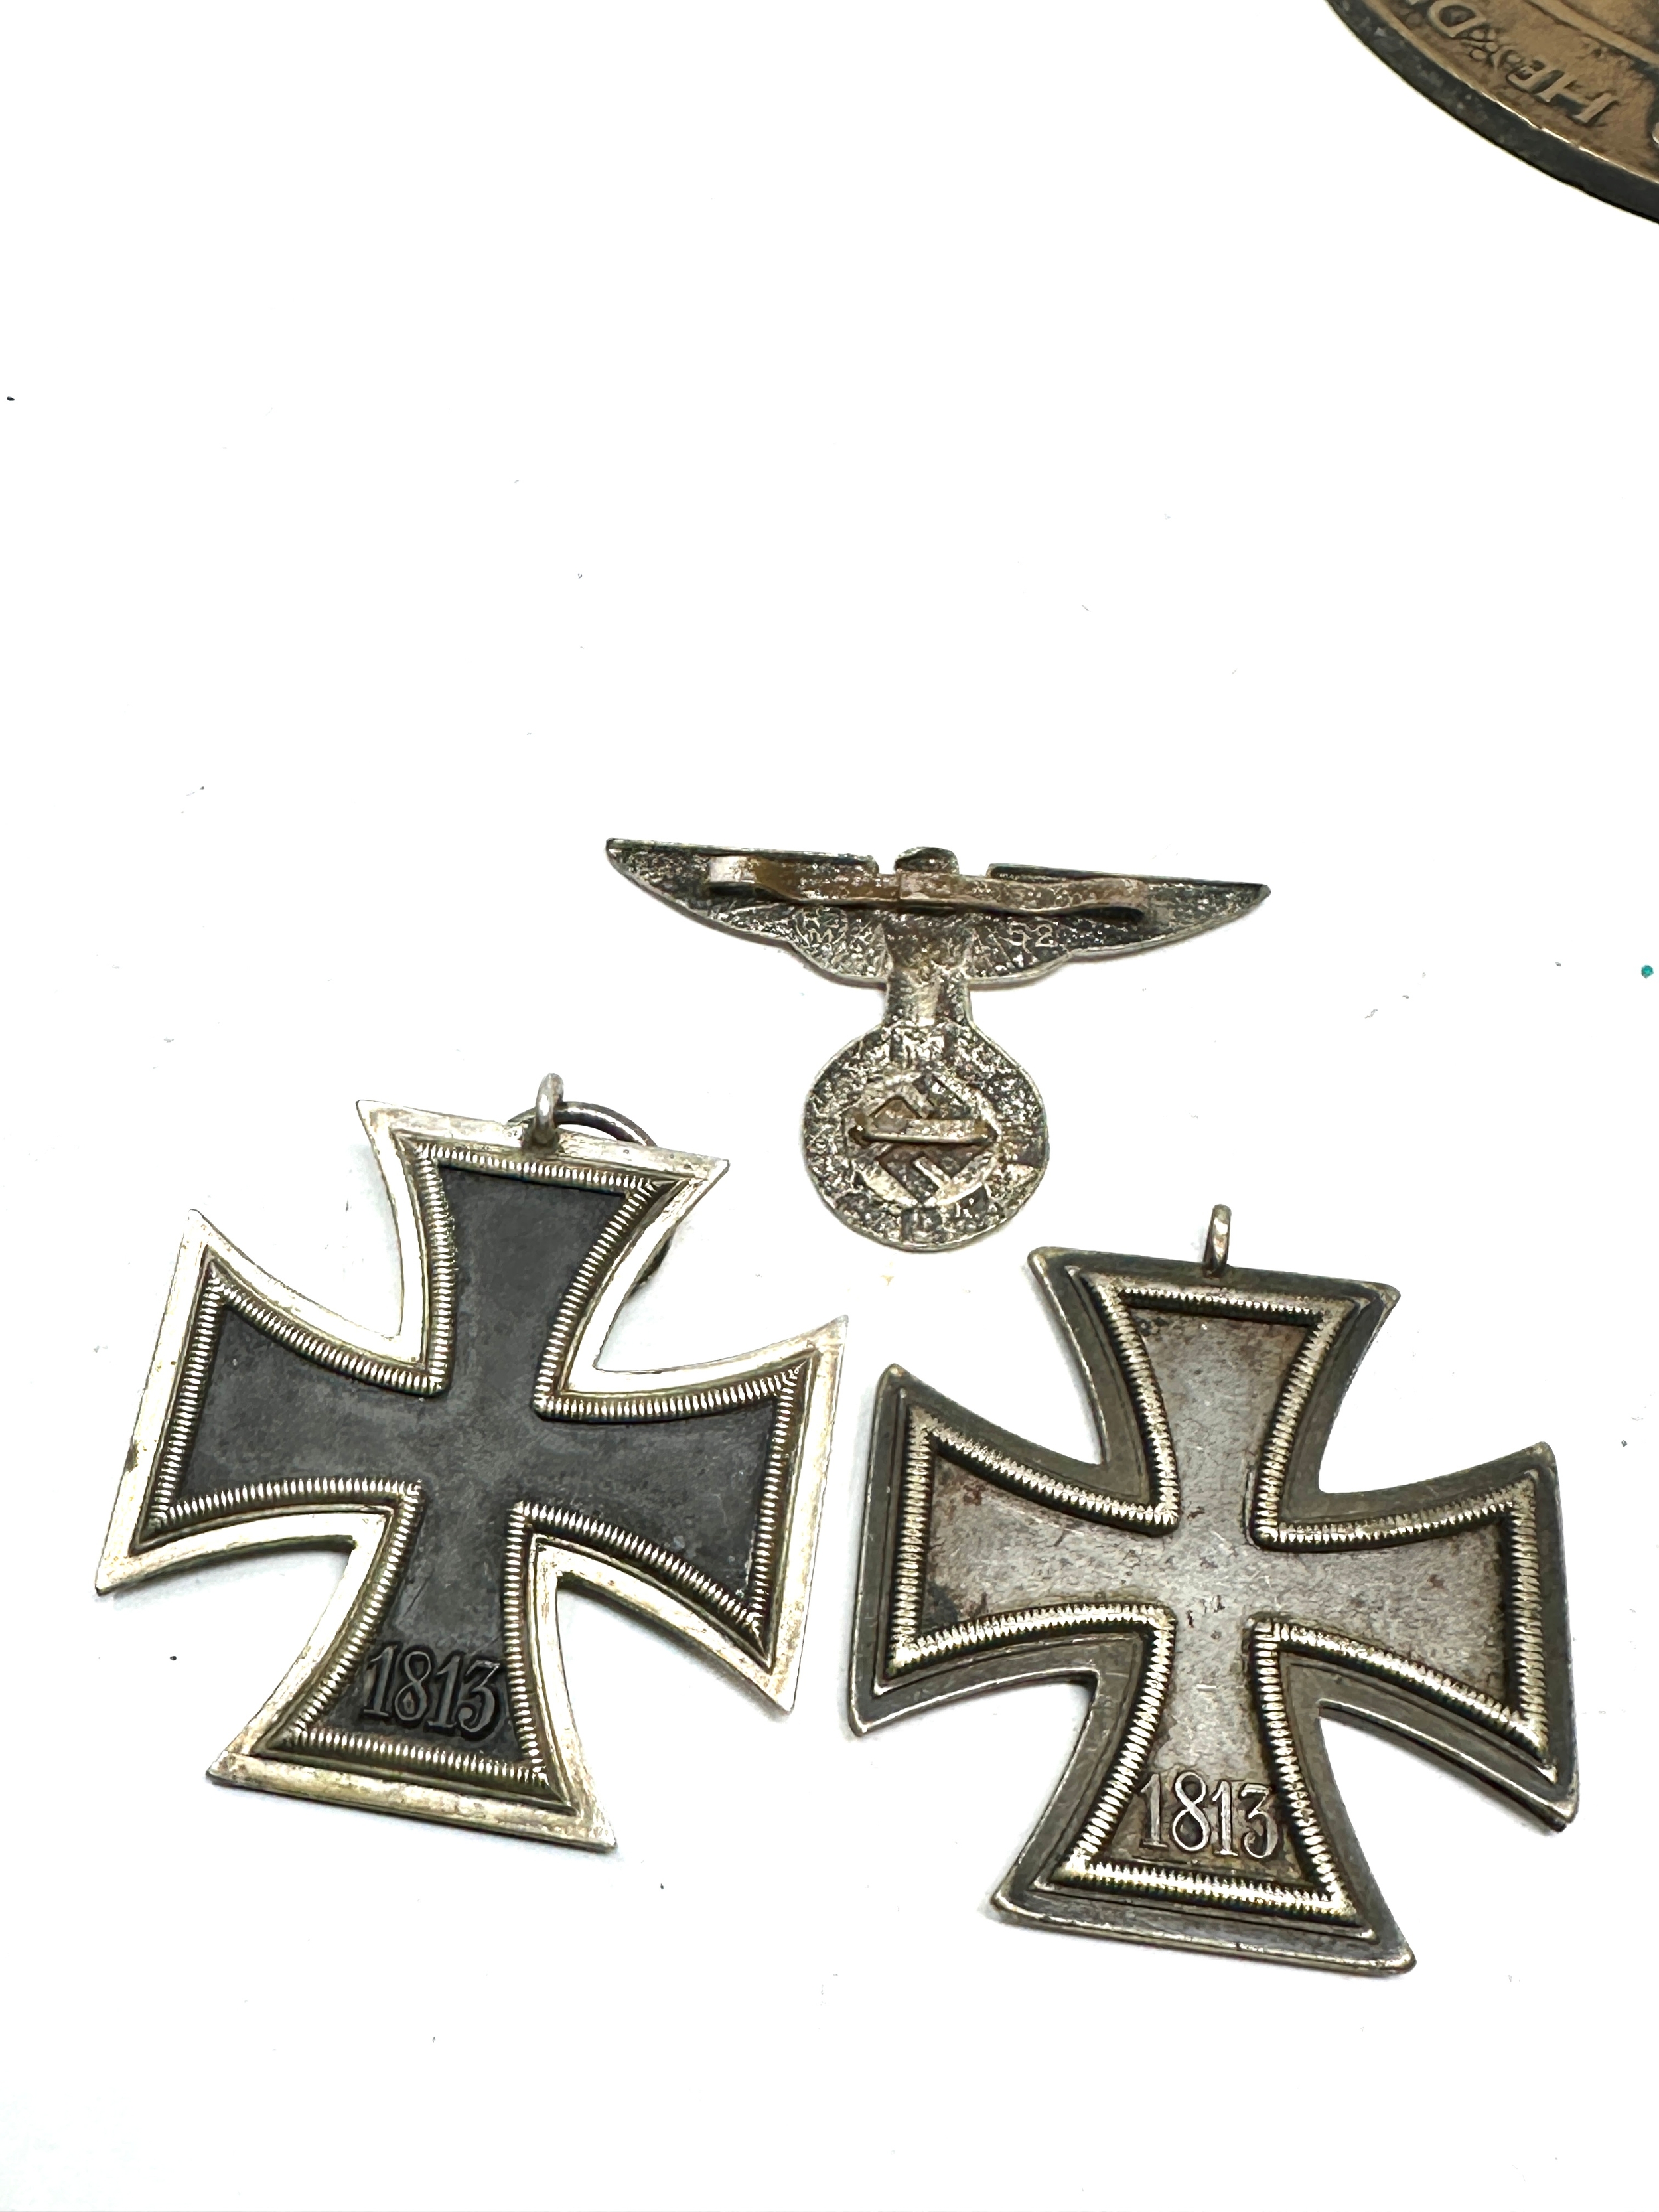 2 ww2 german iron crosses and cap eagle - Image 4 of 5